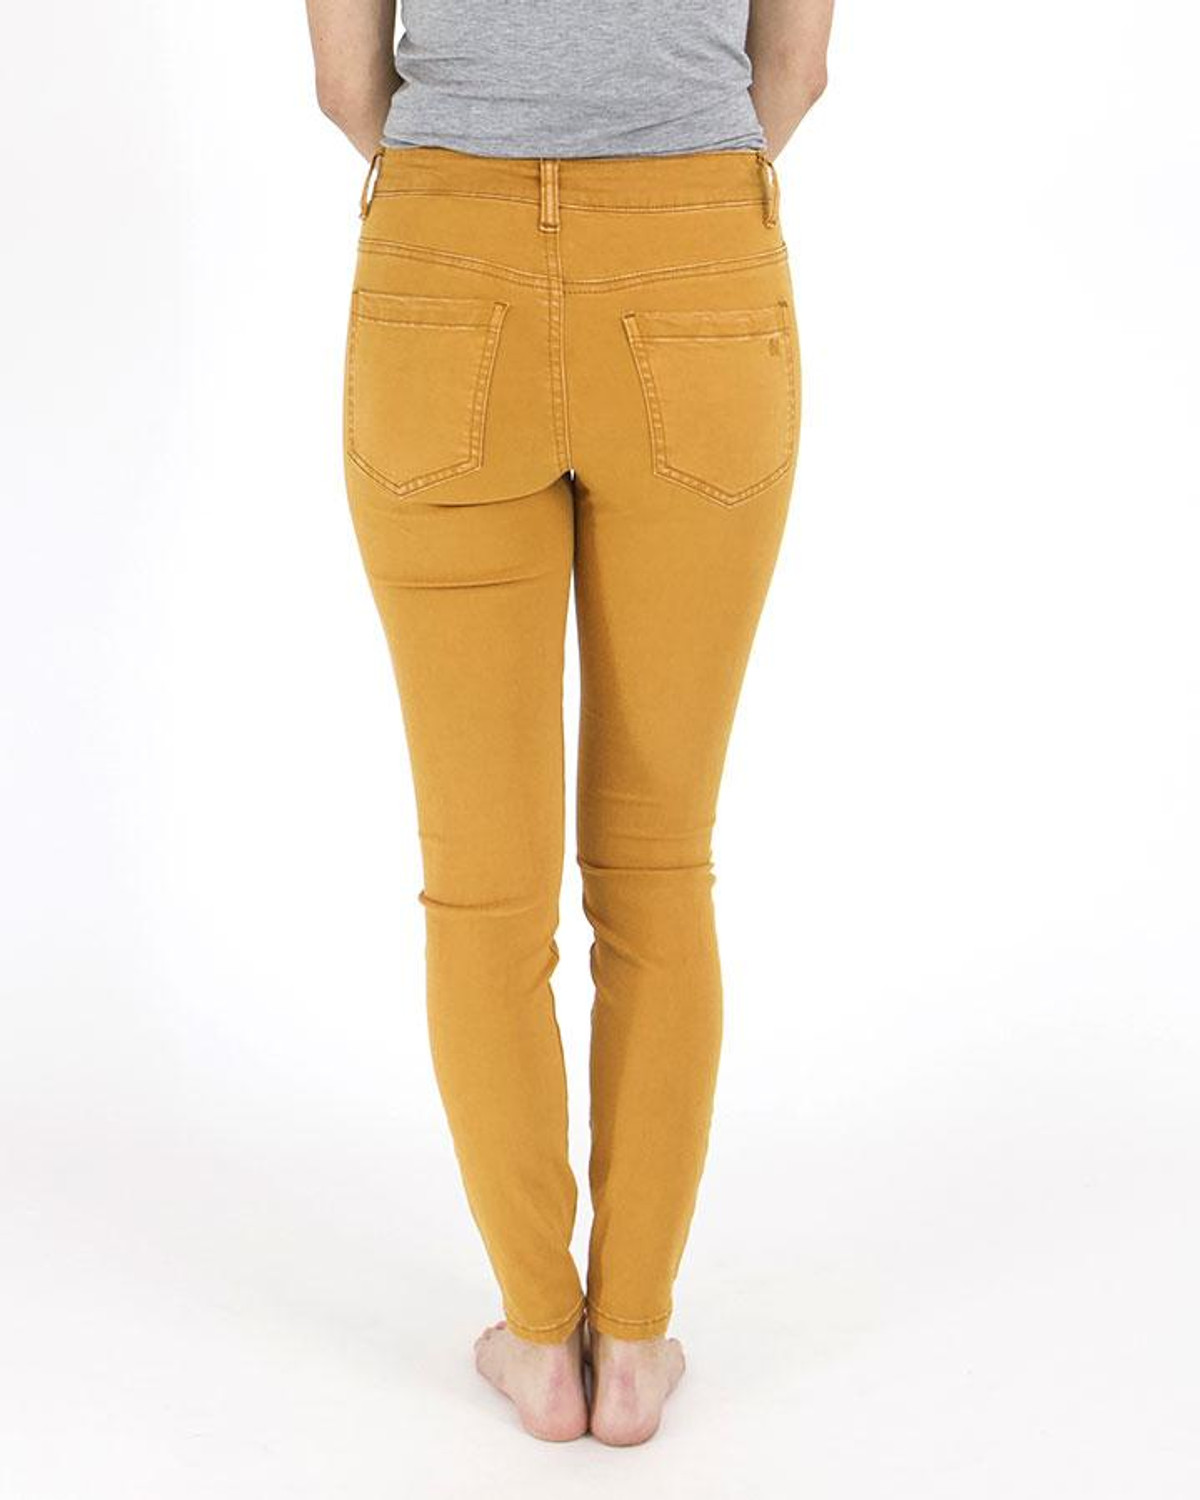 Grace and Lace Colored Jeggings - Mustard - Sublime Boutique